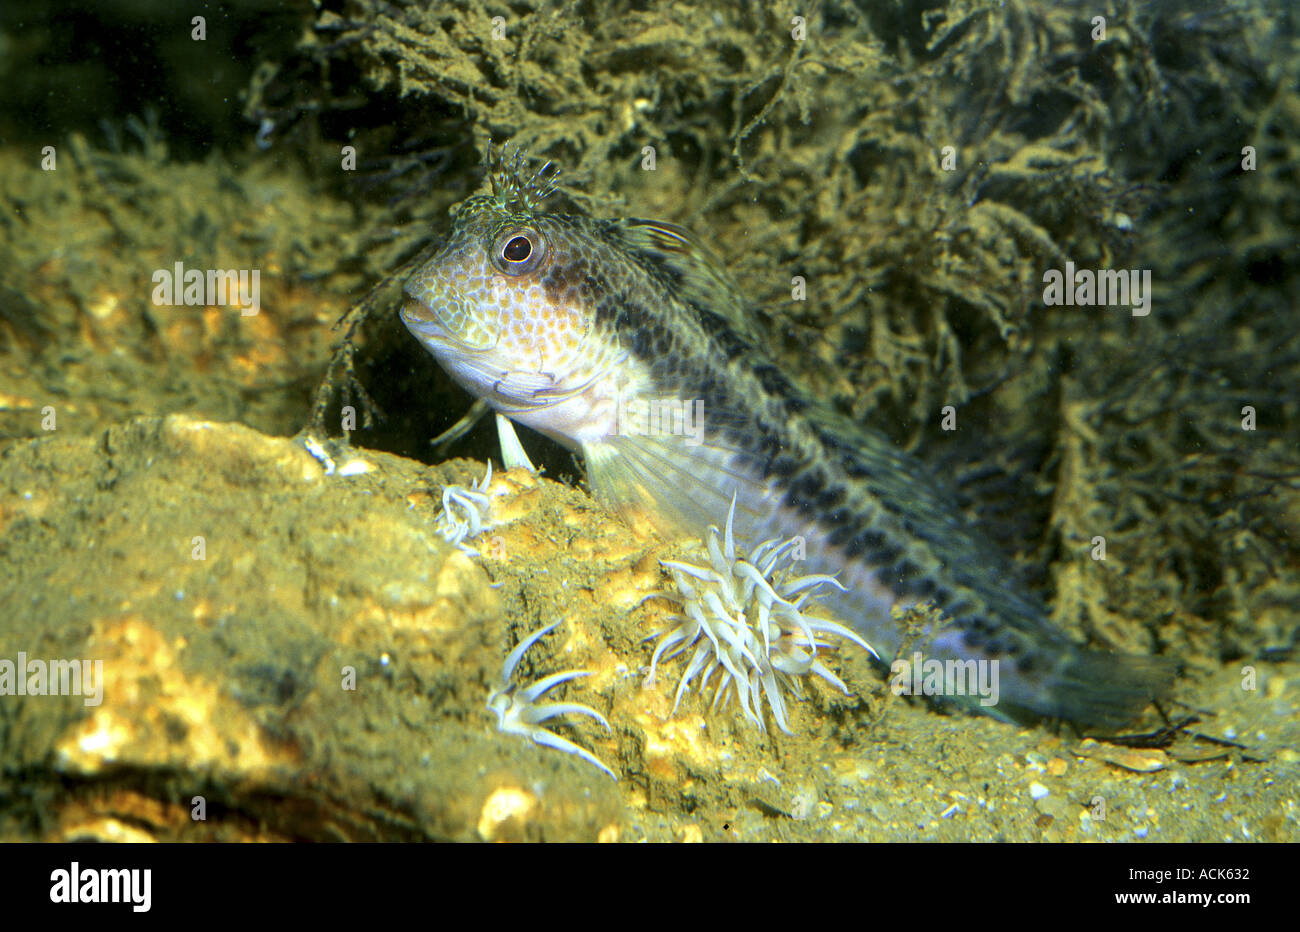 Blenny Blennius rouxi Mediterranean Spain Common fish in rocky areas and seagrass prairies Stock Photo